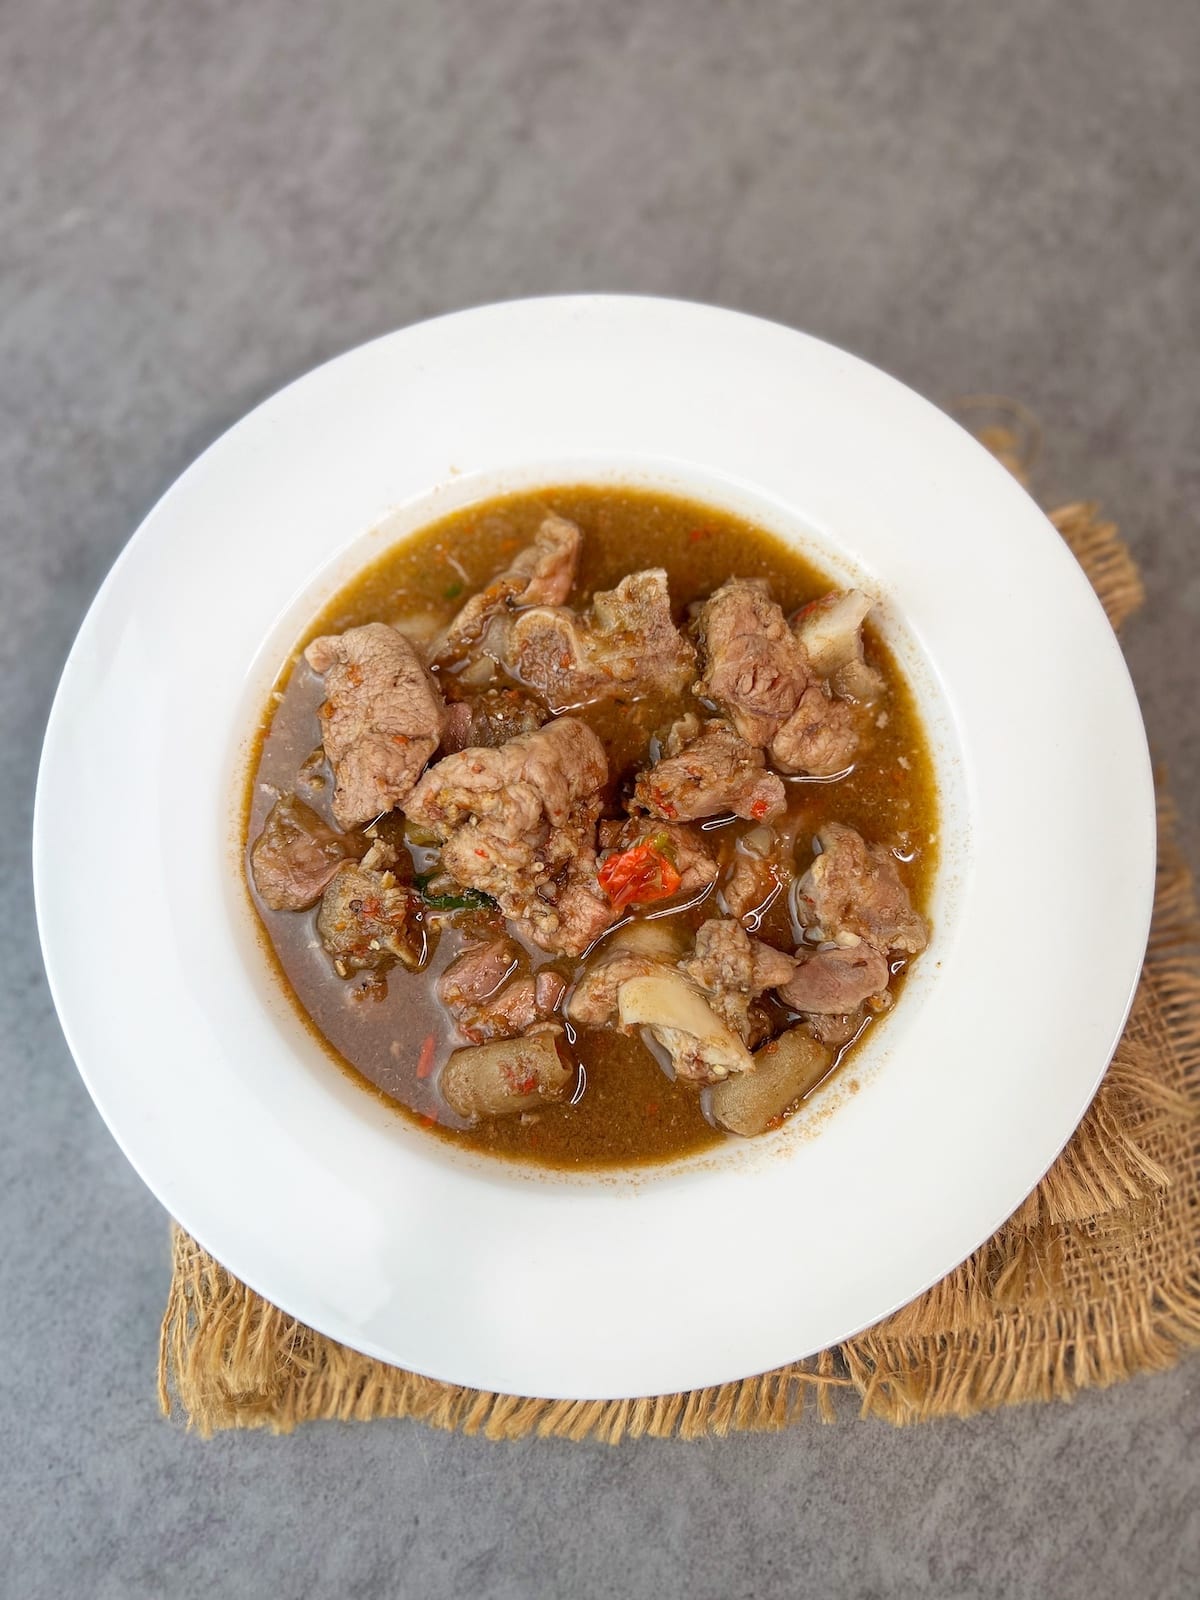 How To Make Nigerian Pepper Soup With Goat Meat